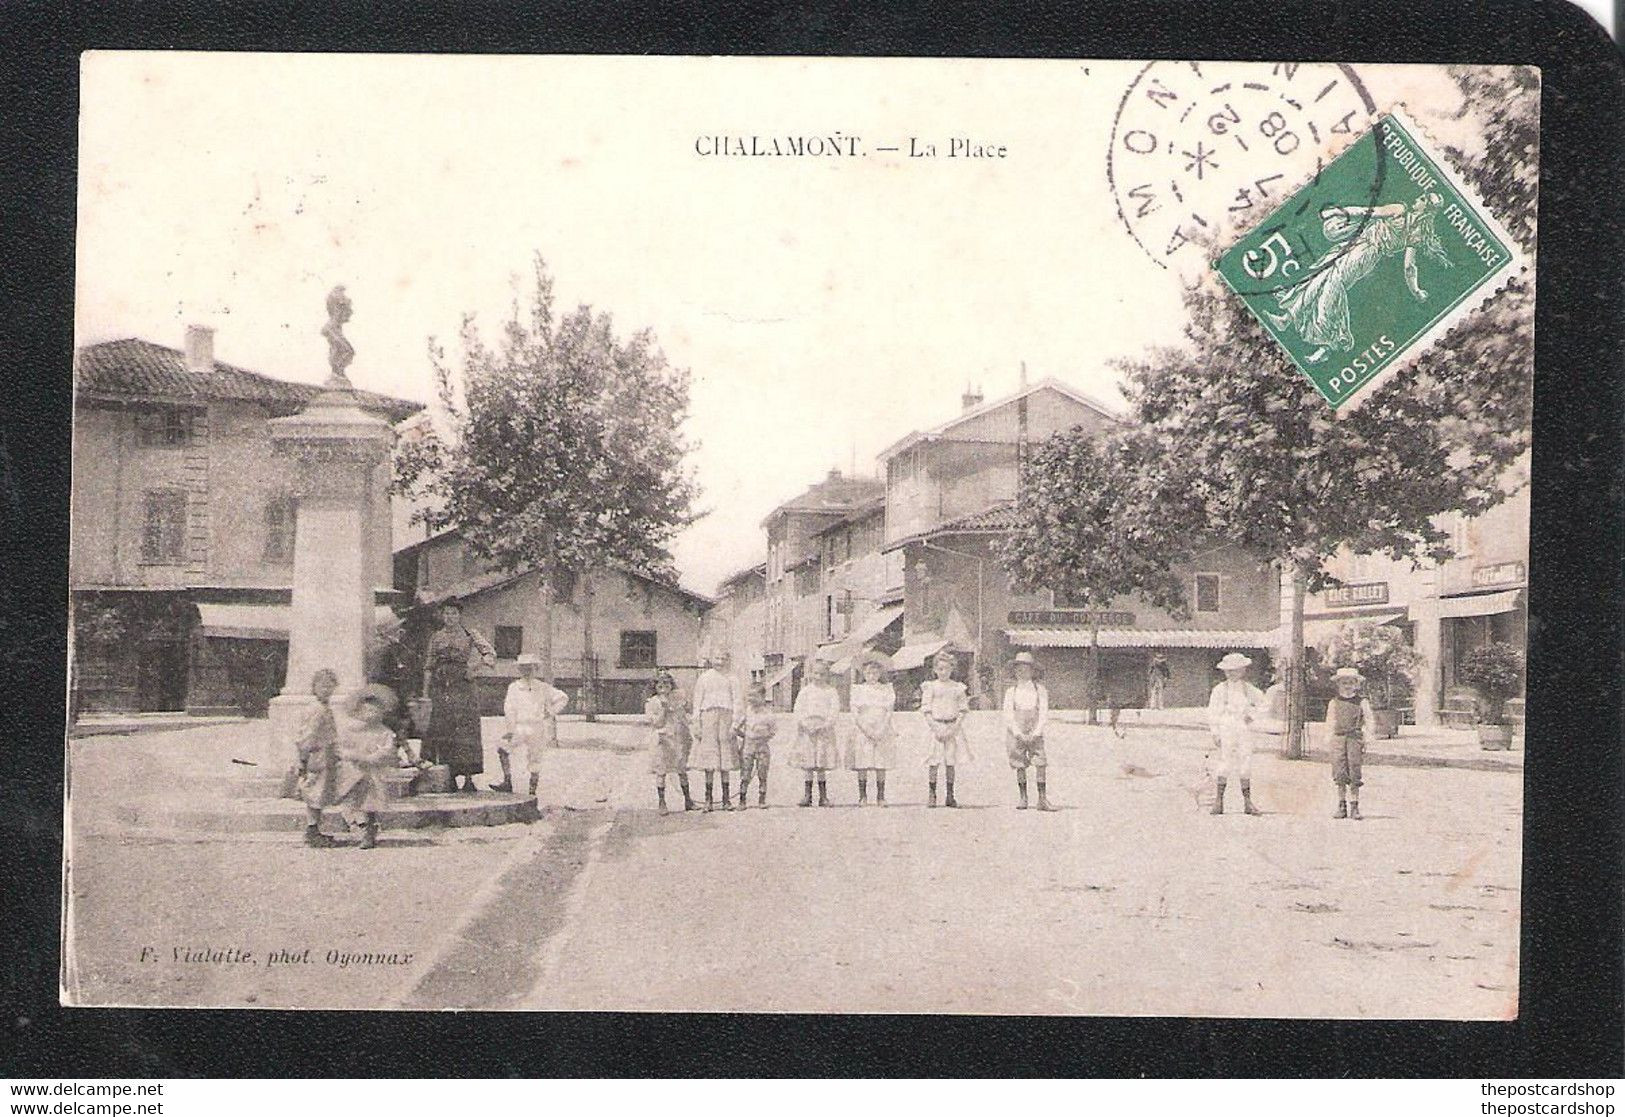 CPA 01 CHALAMONT-La Place F.VIALATTE PHOT OYONNAX RARE MORE FRANCE FOR SALE @1 EURO OR LESS - Sin Clasificación